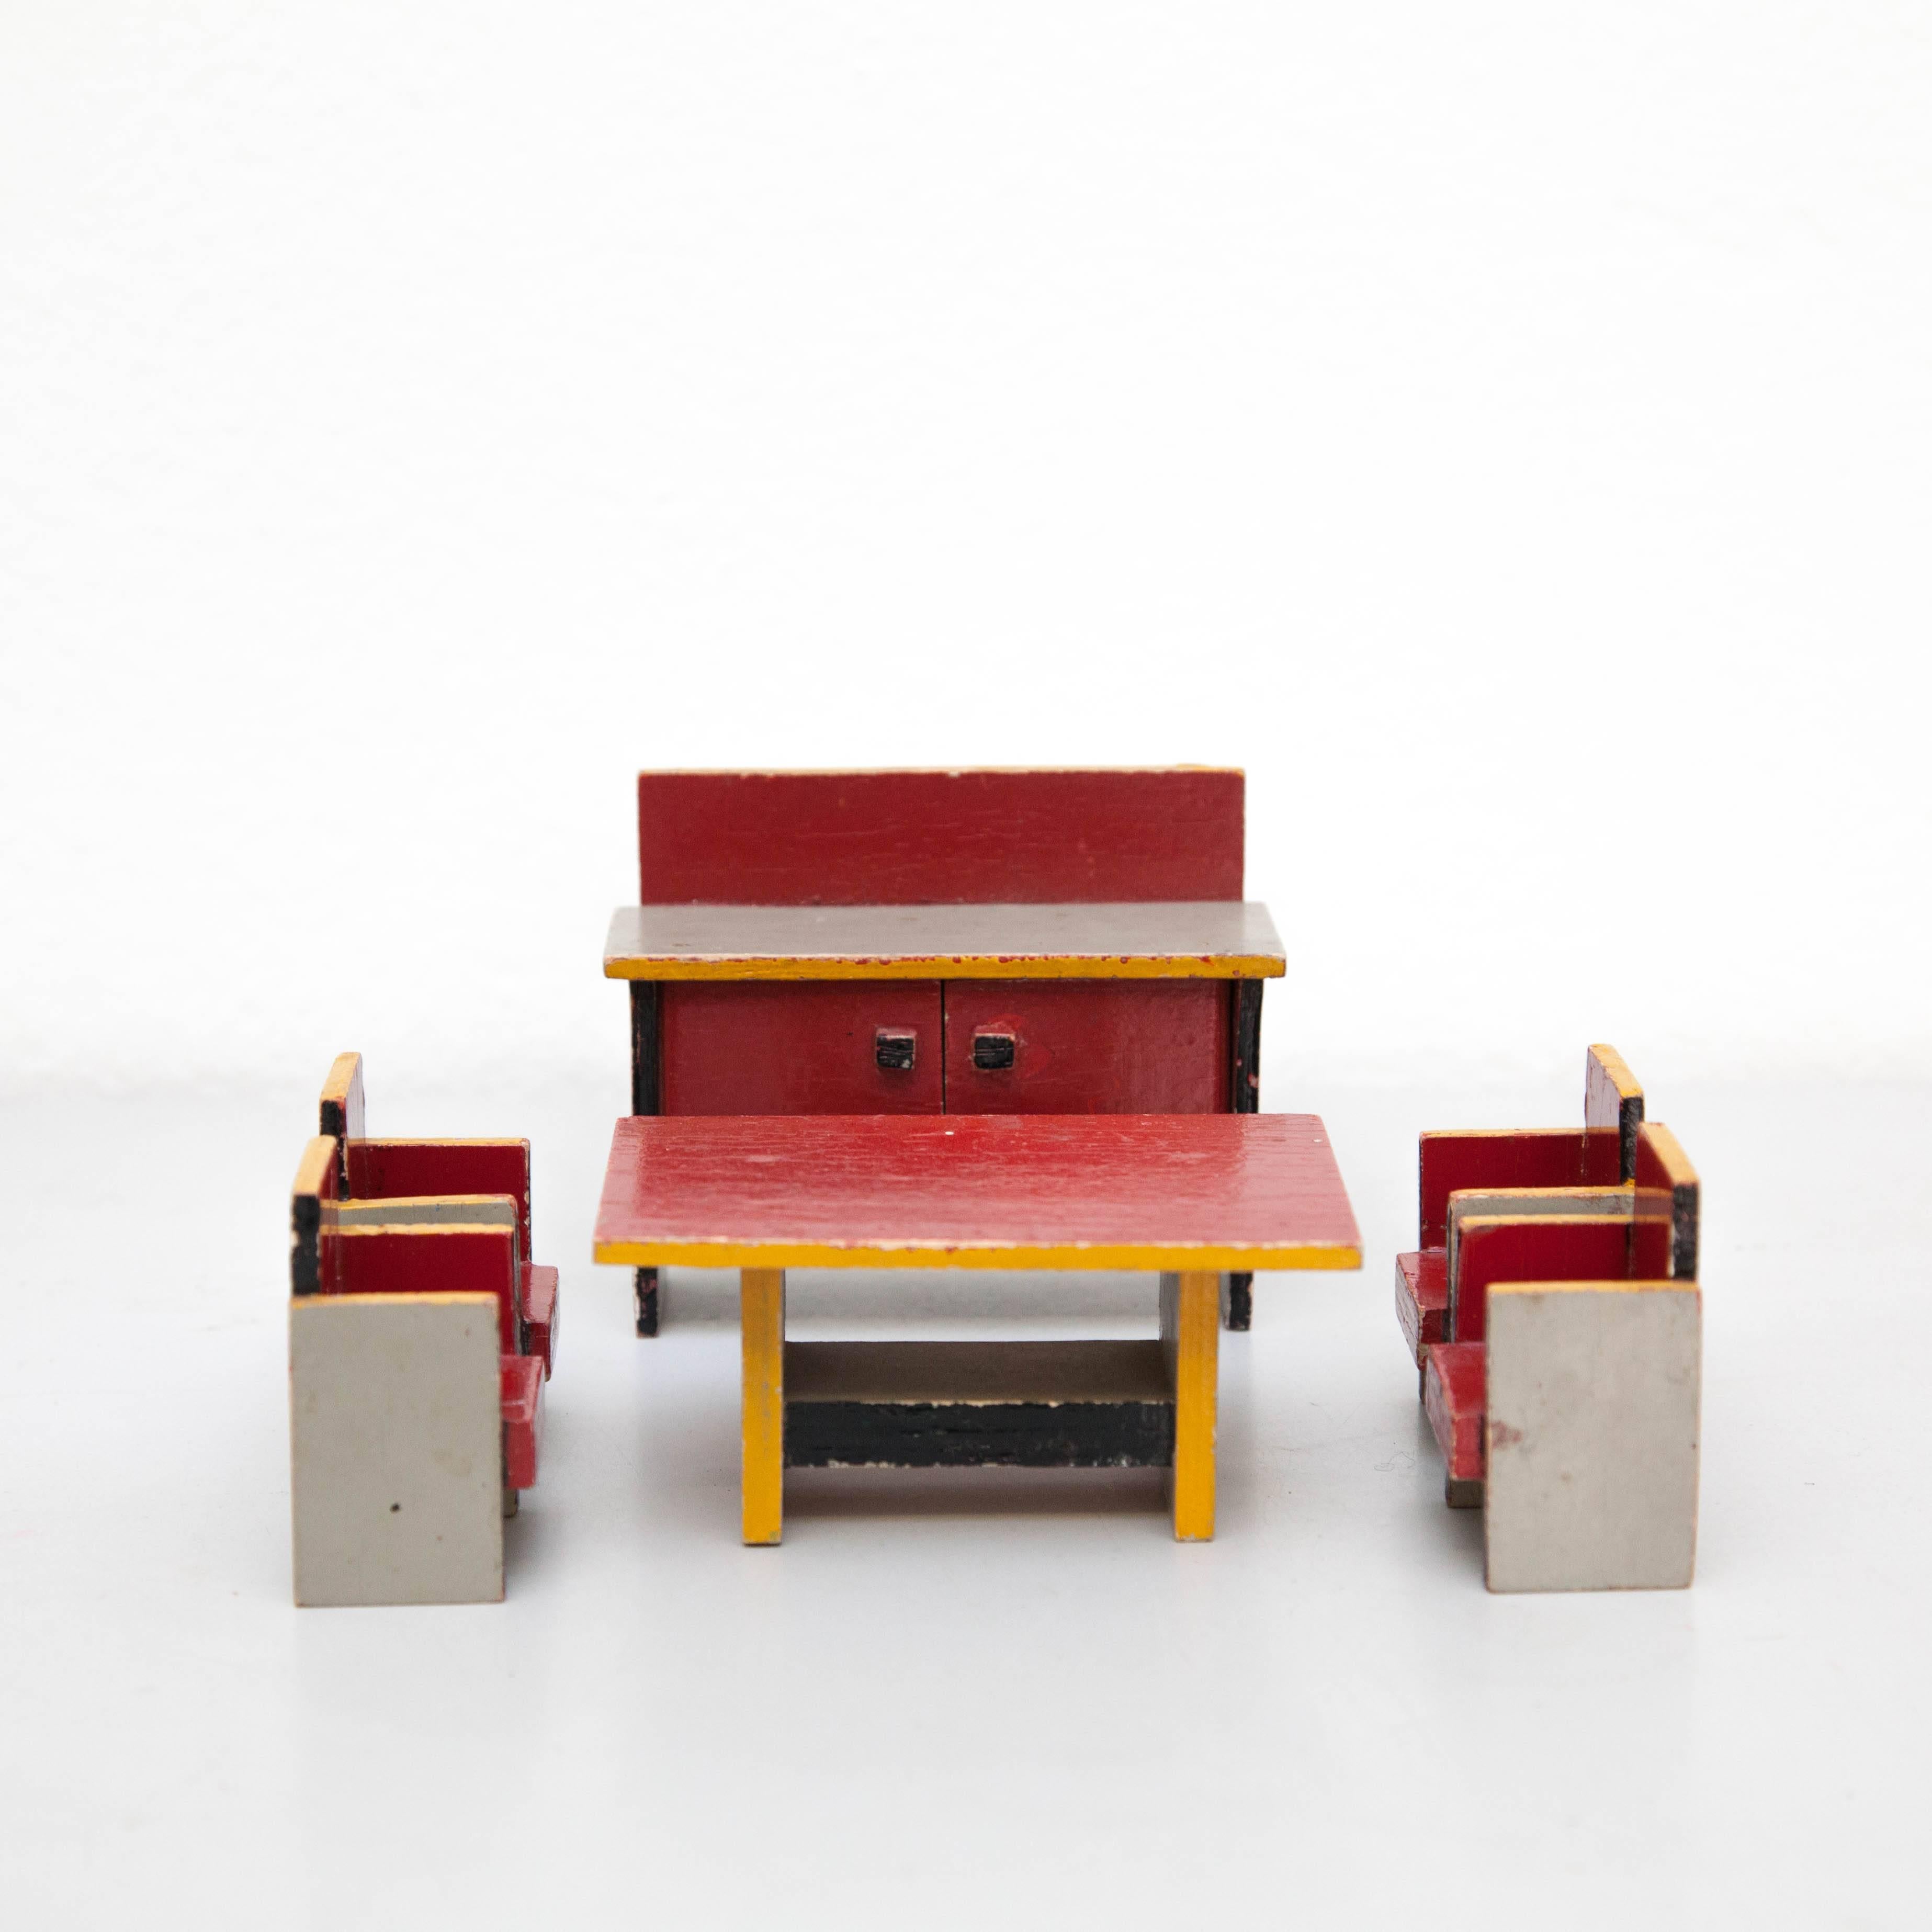 Toy designed by Ko Verzuu, circa 1940.
Manufactured by ADO in Netherlands.

Set of four painted wood chair, dining table and cabinet in the style of De Stijl.

In good original condition, with minor wear consistent with age and use, preserving